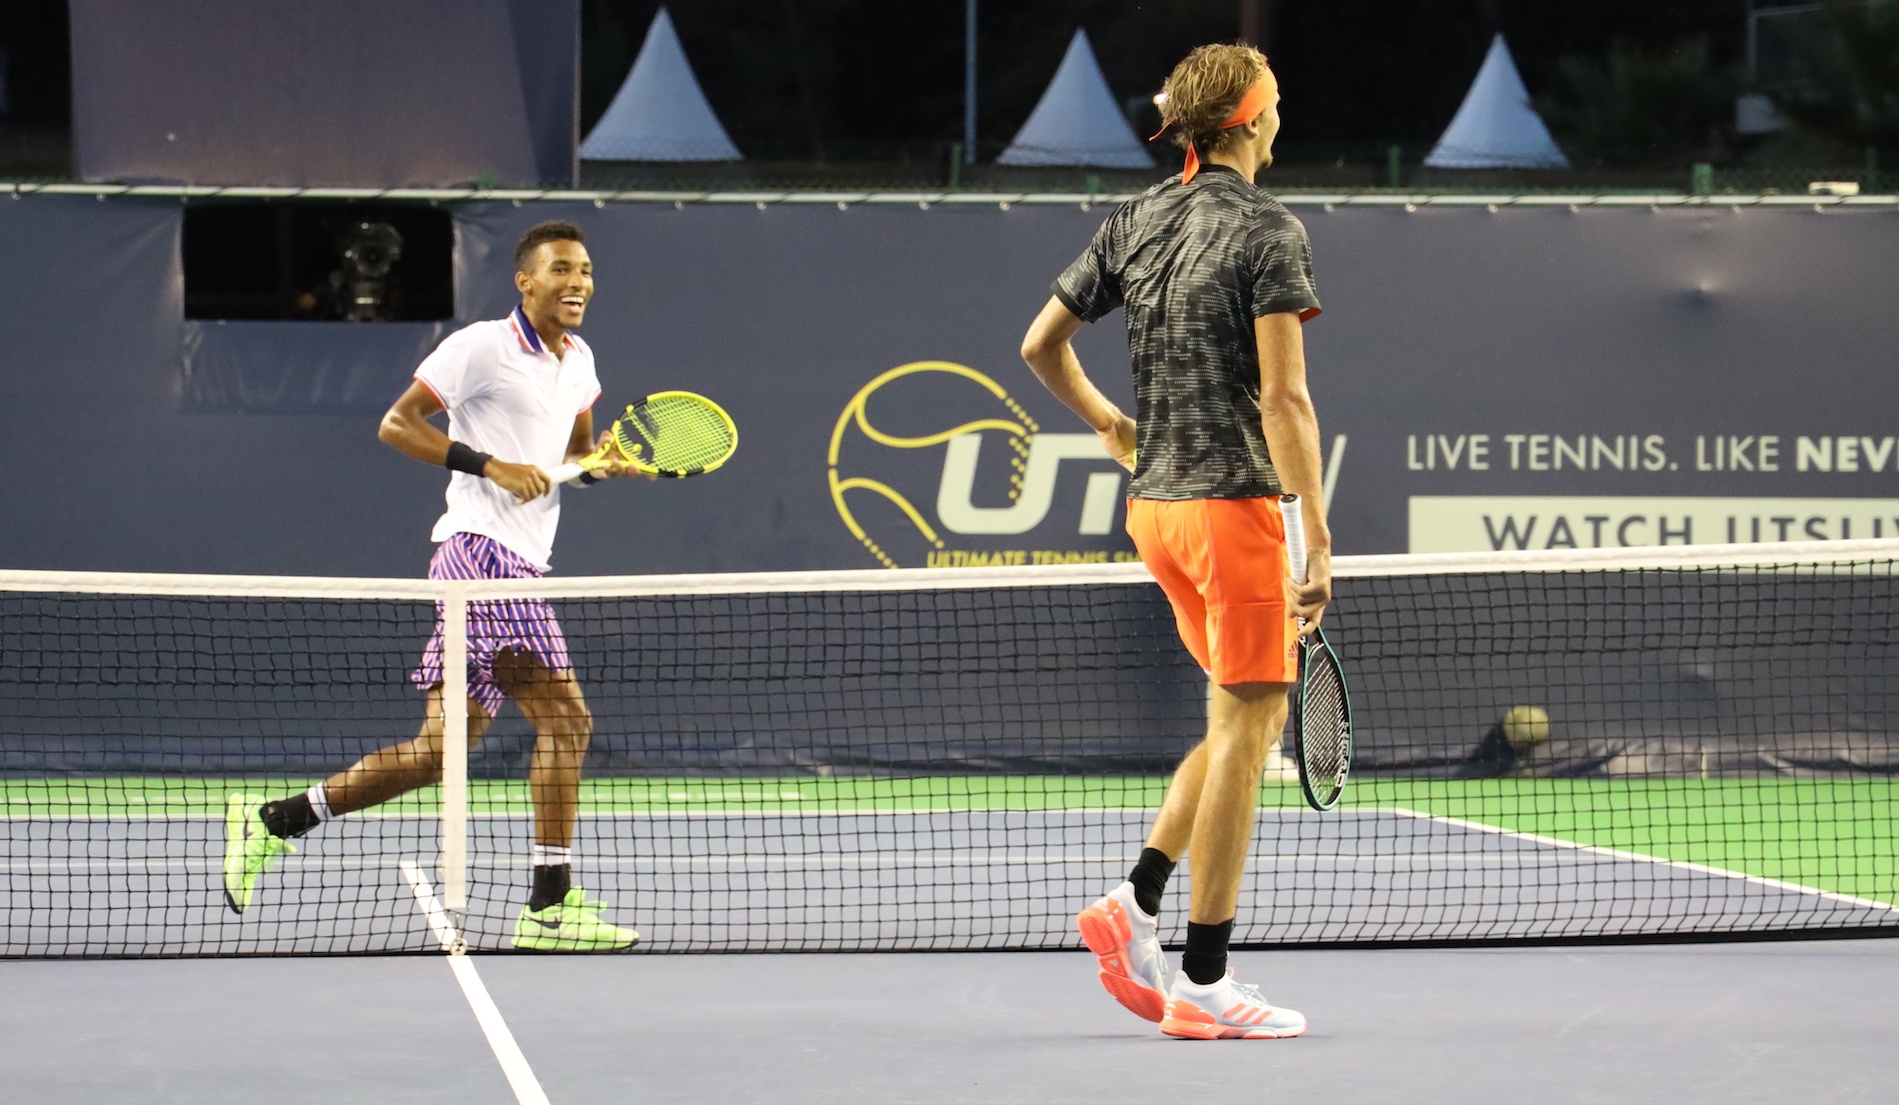 UTS2 final day to feature Zverev, Auger-Aliassime, Cornet and more!